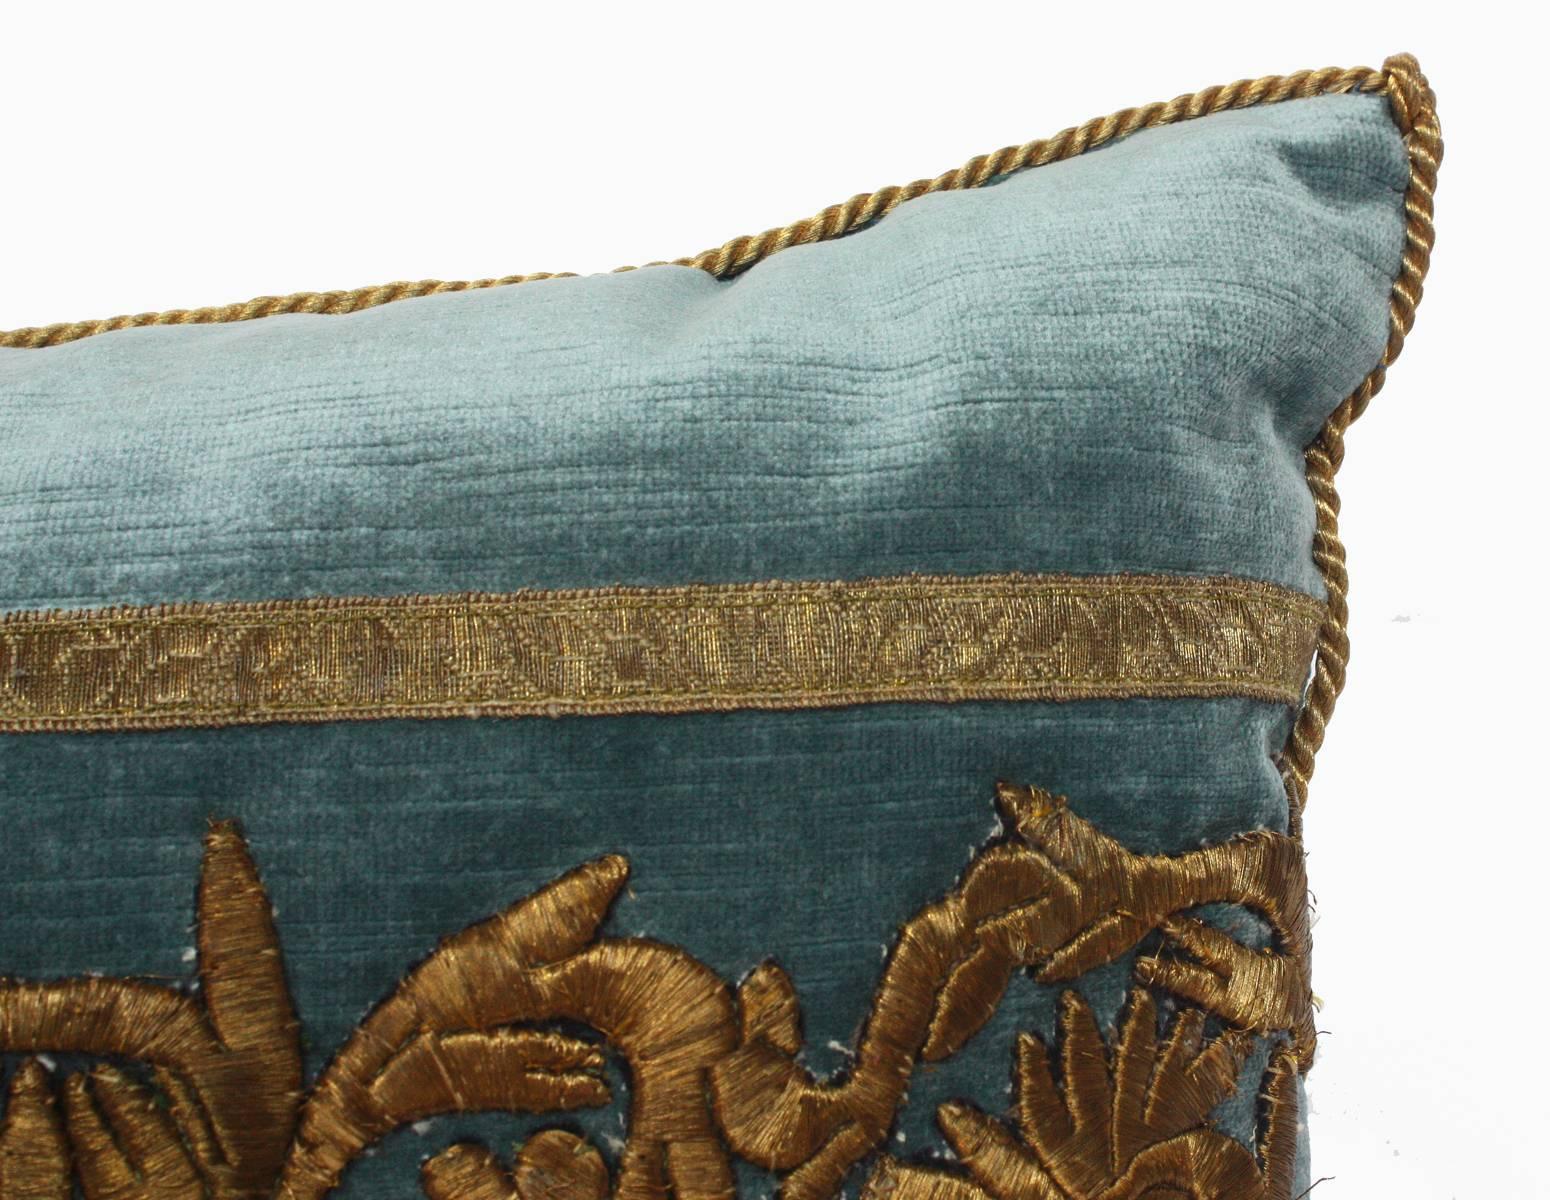 Antique raised gold metallic embroidery thought to be Egyptian or Syrian bordered with antique European gold metallic galloon on Wedgwood Blue velvet. Hand trimmed with gold metallic cording knotted in the corners. Down filled.

by Southern pillow